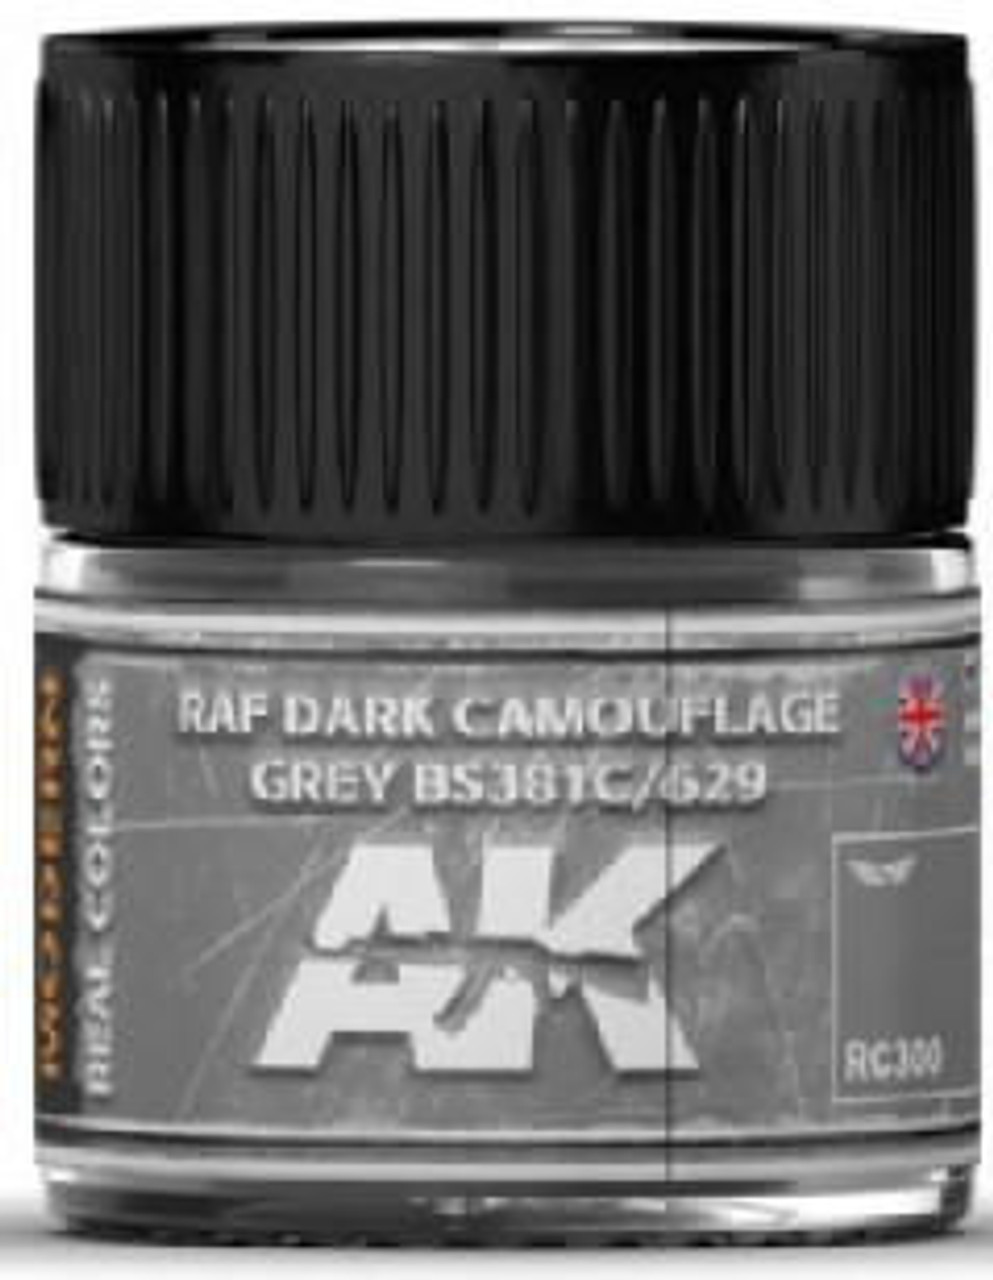 AK-RC300 AK Interactive Real Colors RAF Dark Camouflage Grey BS381C/629 Acrylic Lacquer Paint 10ml Bottle  MMD Squadron